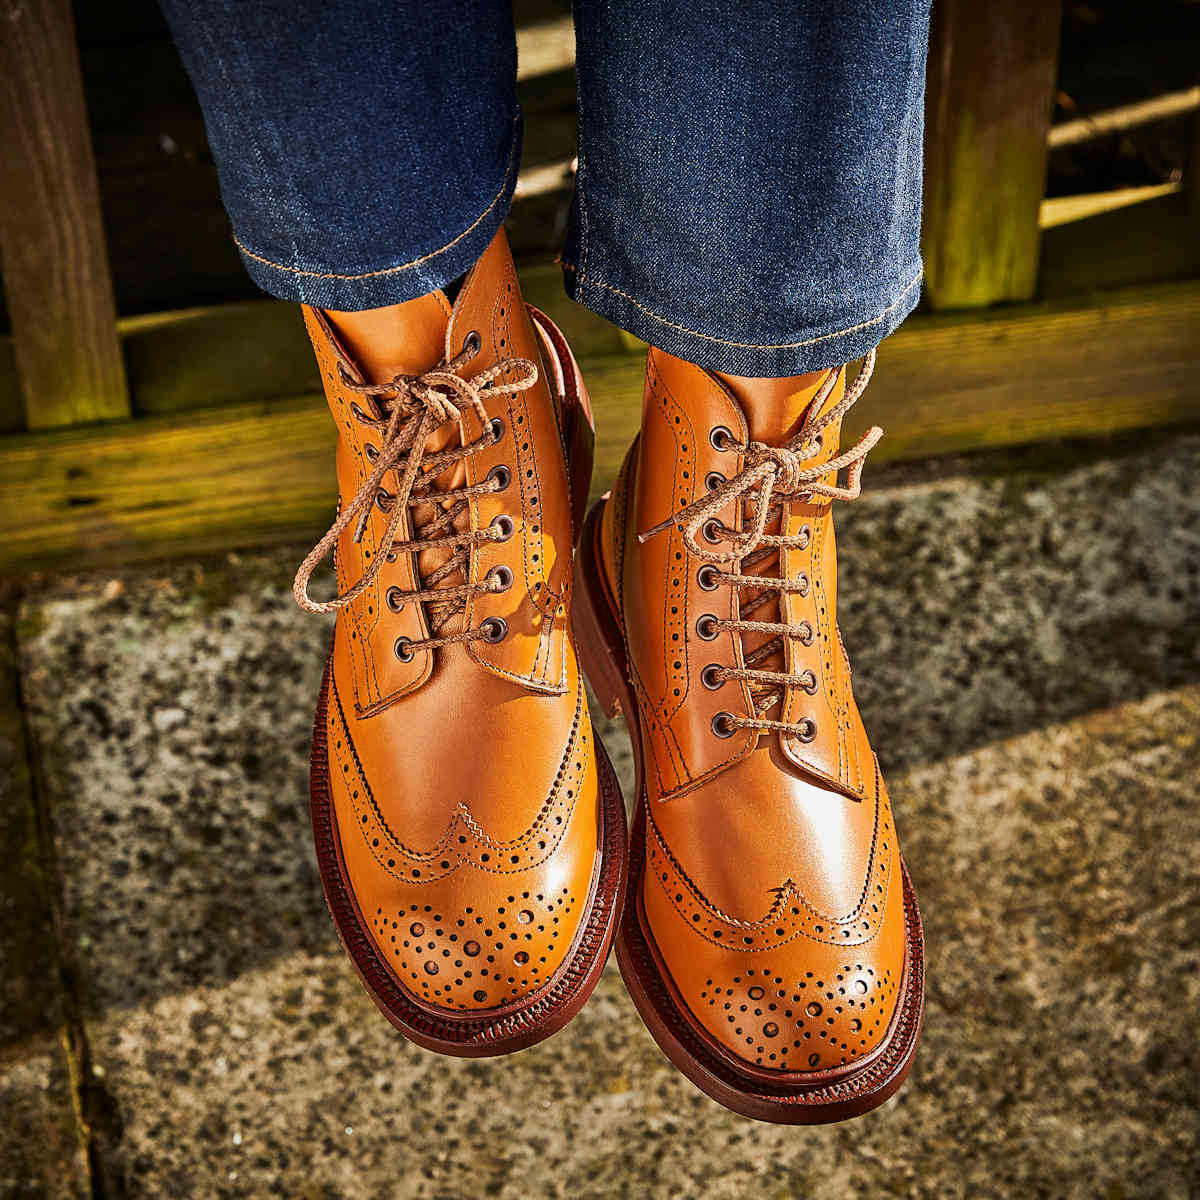 Acorn Tan Ladies English Country Brogues Trickers Stephy